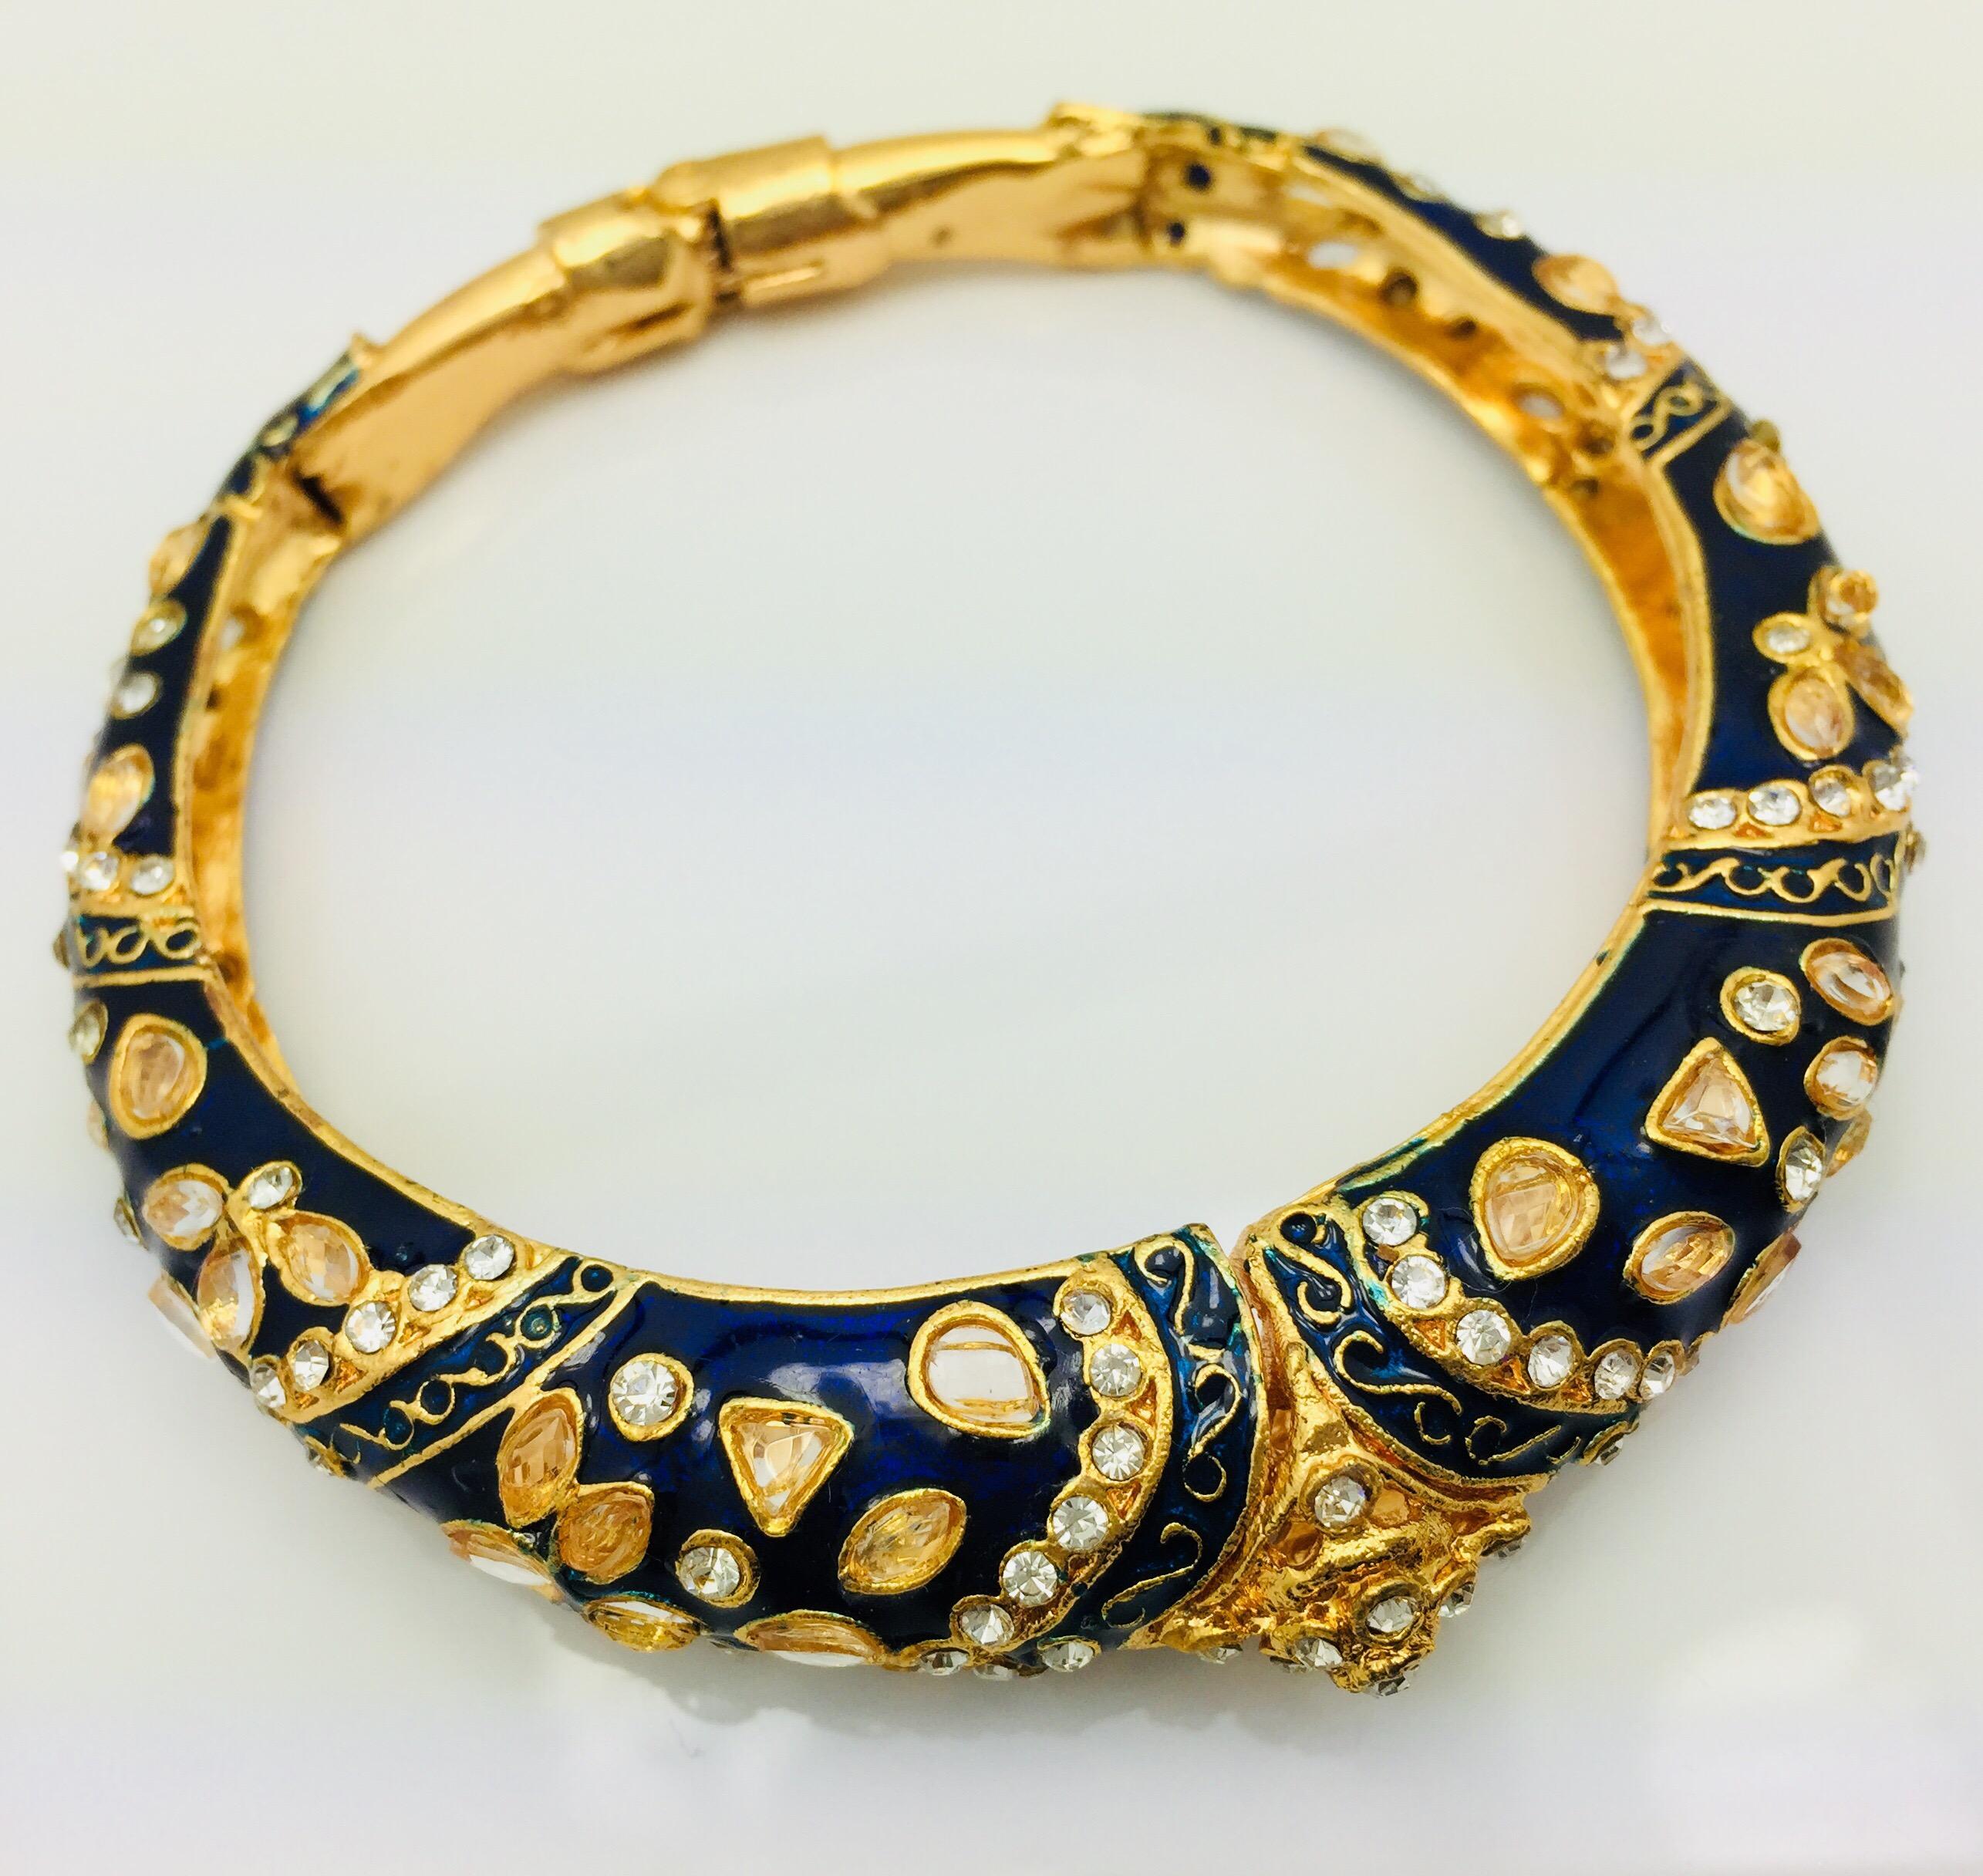 Gold tone hinged blue enamel bracelet featuring faux uncut diamond crystals and rhinestones.  
Inner diameter 65.00 mm (2.5 in), inner circumference 204.2 mm (7.00 in)

FOLLOW  MEGHNA JEWELS storefront to view the latest collection & exclusive